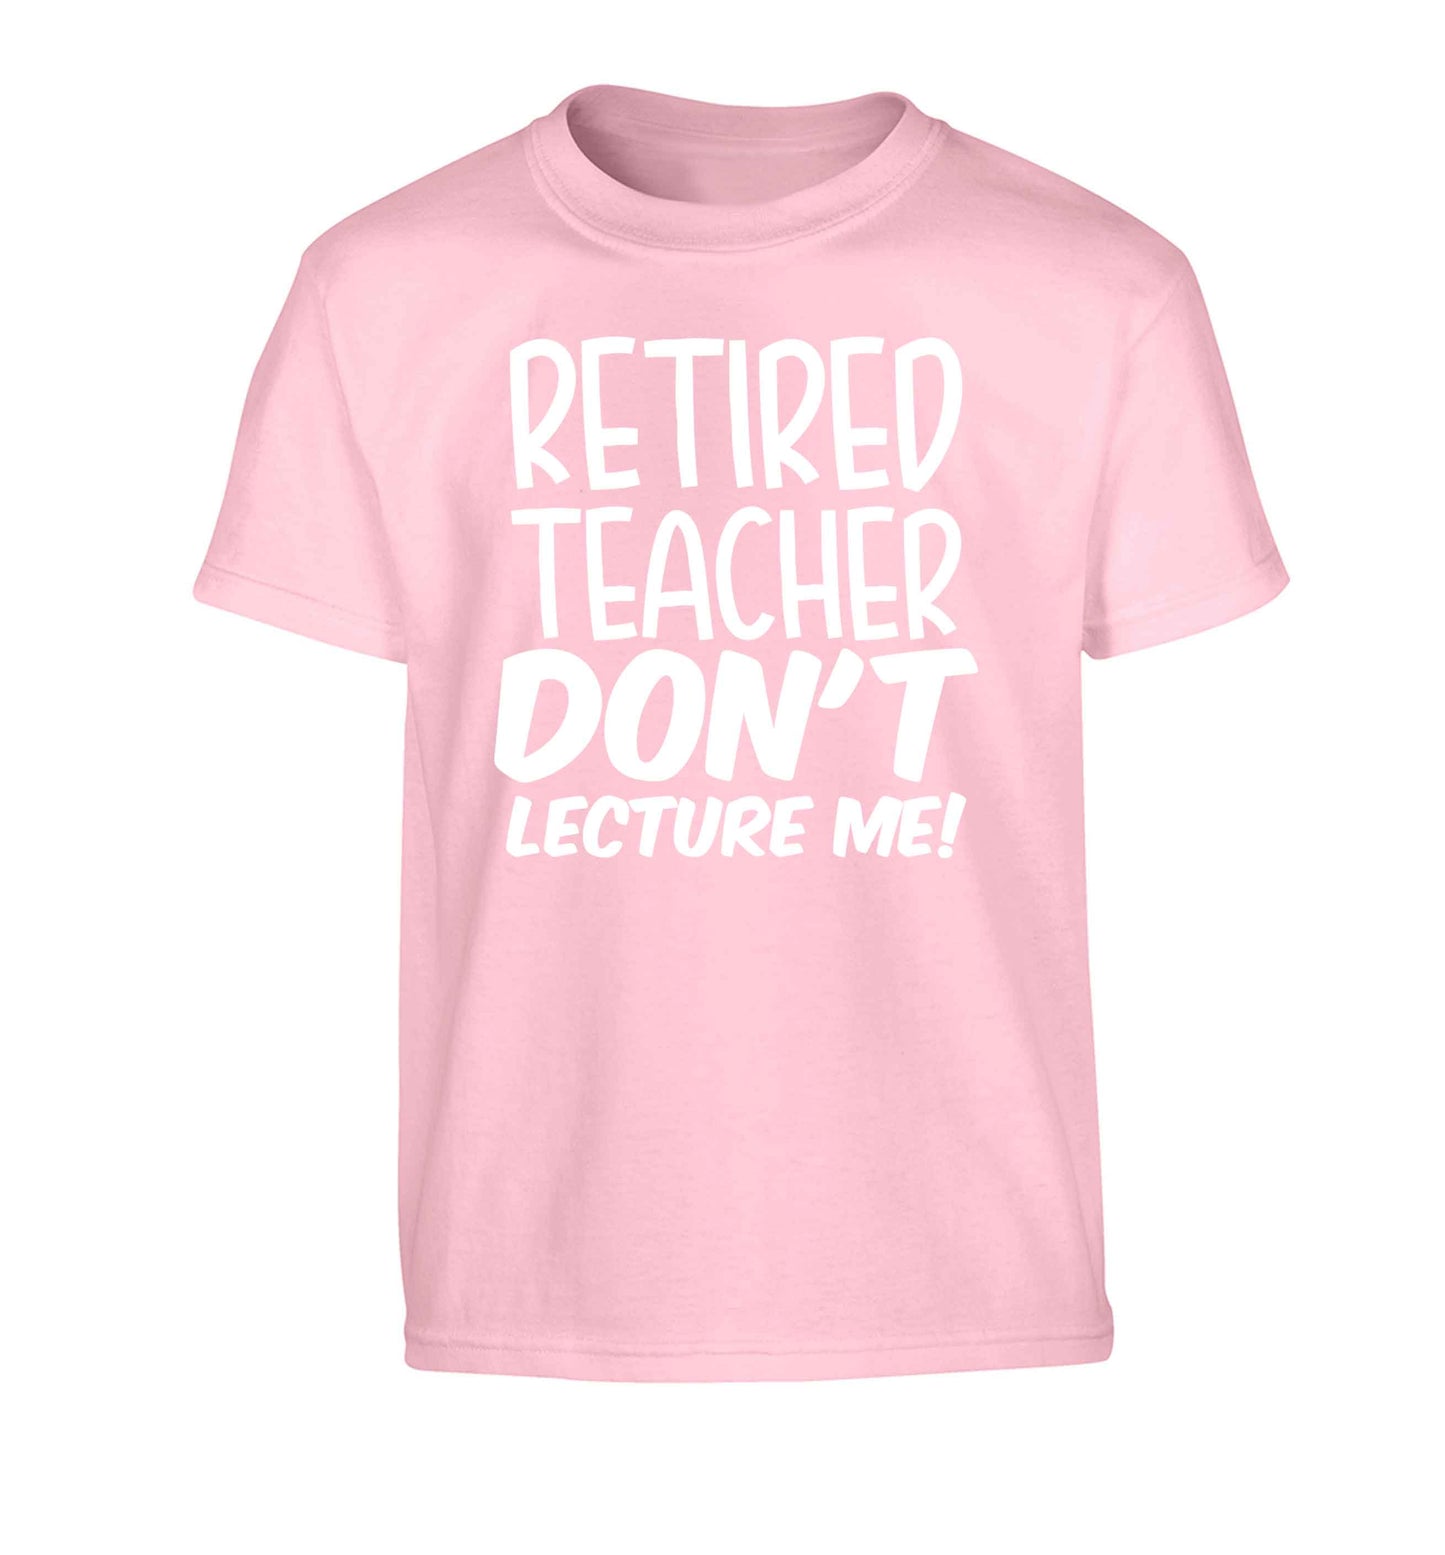 Retired teacher don't lecture me! Children's light pink Tshirt 12-13 Years